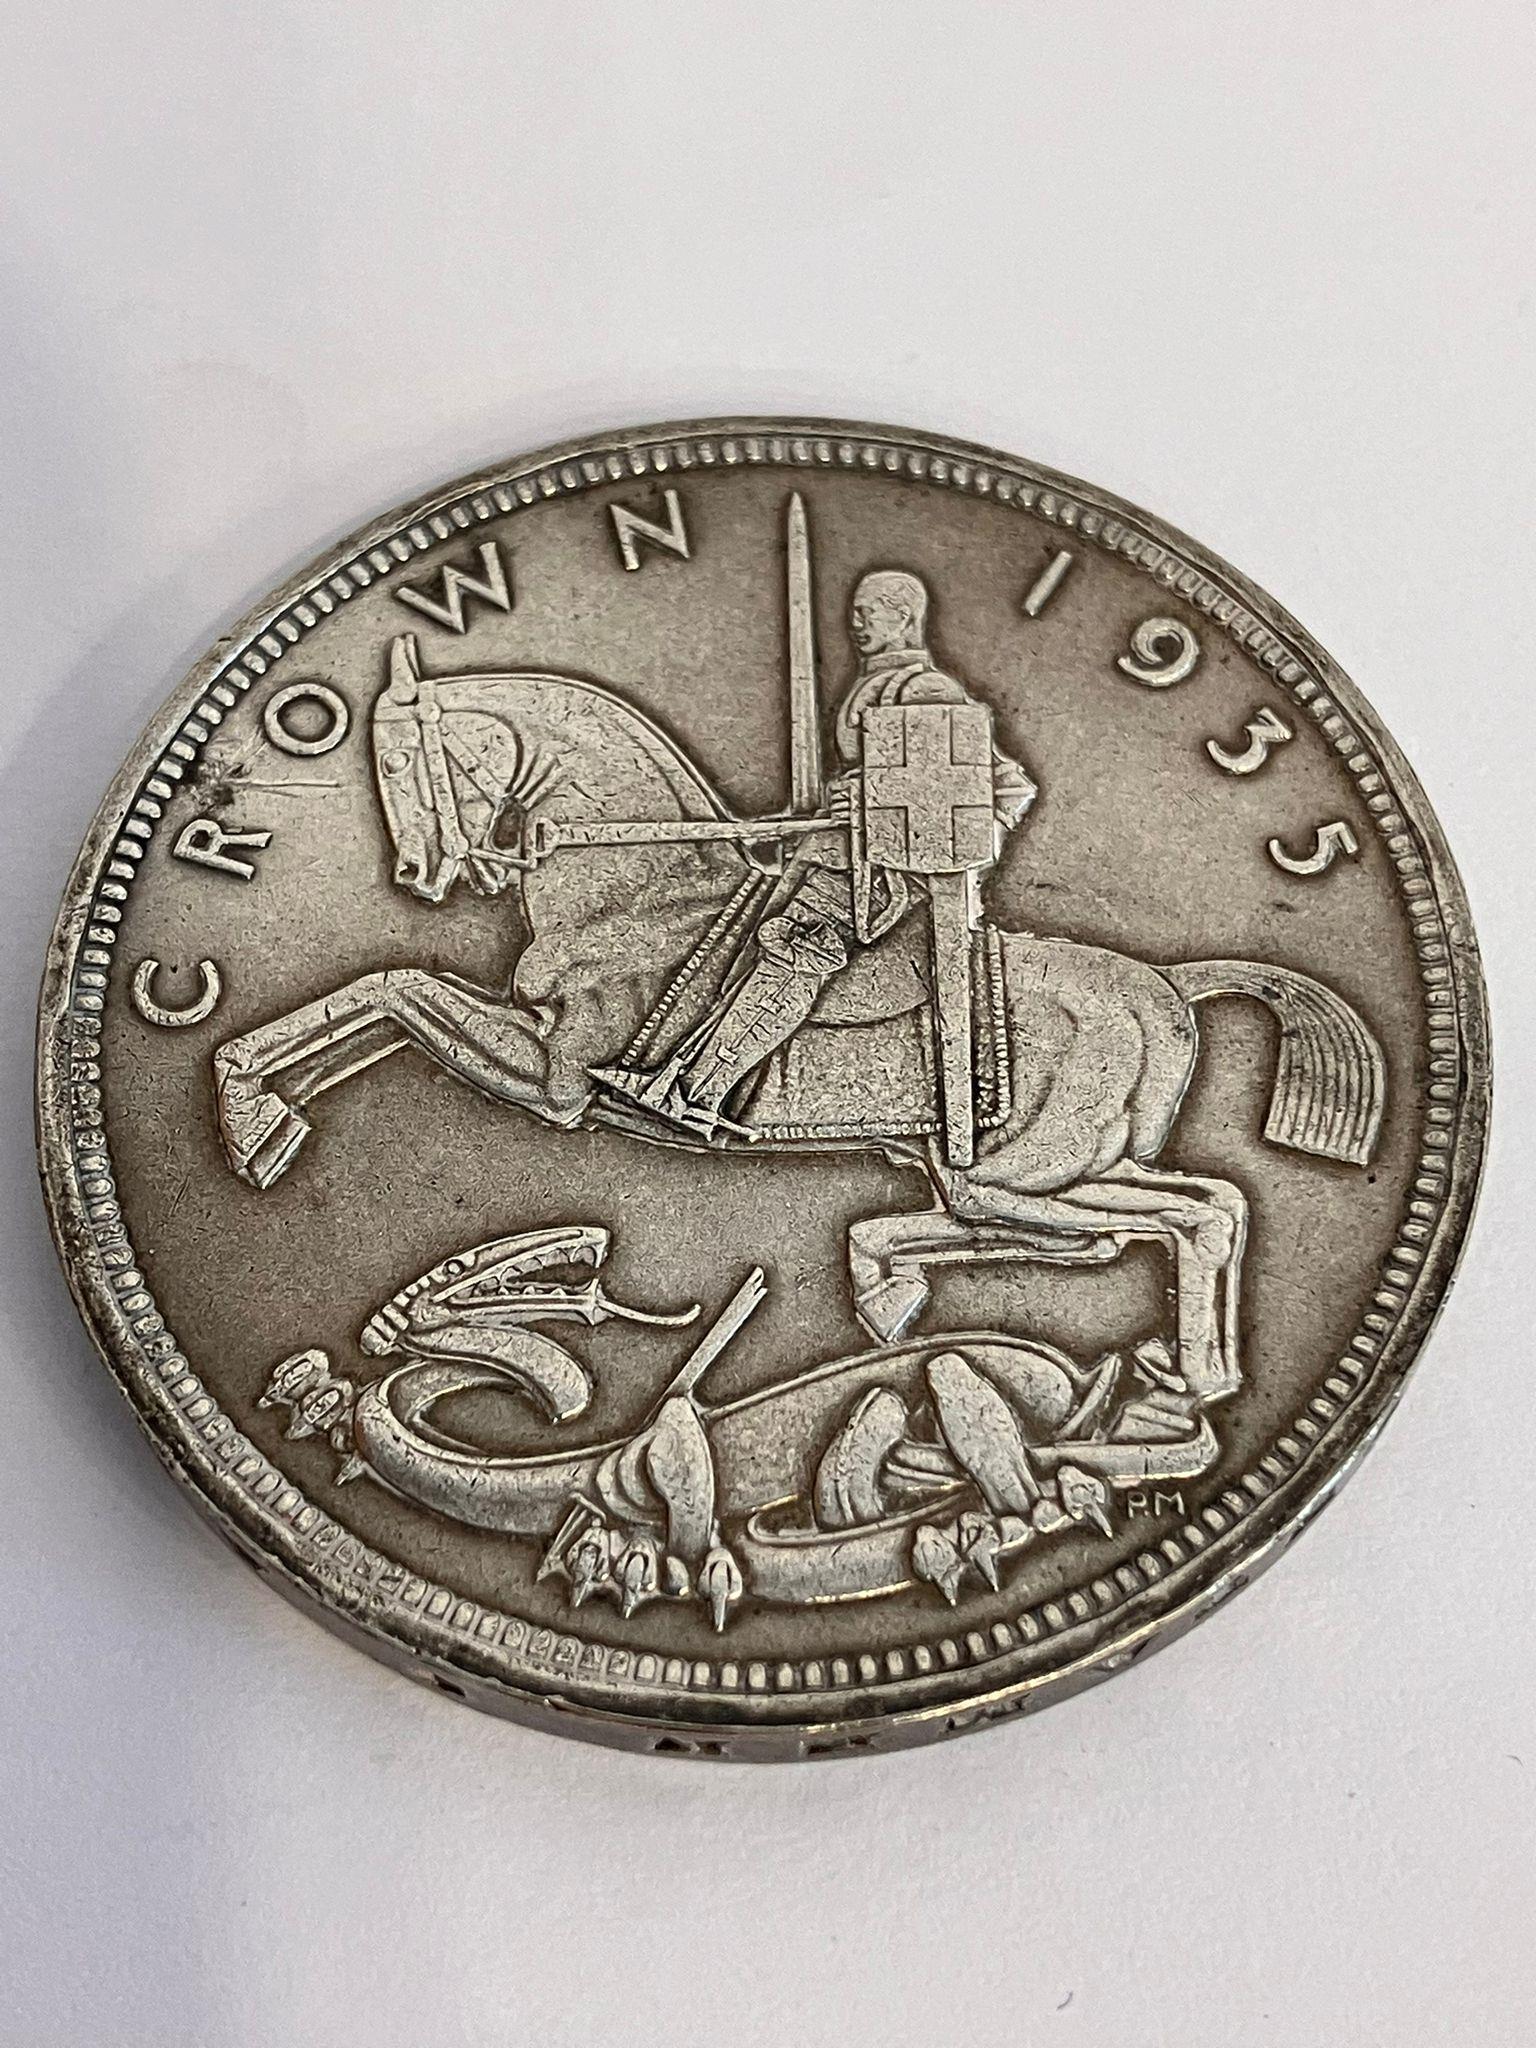 1935 SILVER ROCKING HORSE CROWN. Very fine/Extra finecondition. Having exceptional bold and raised